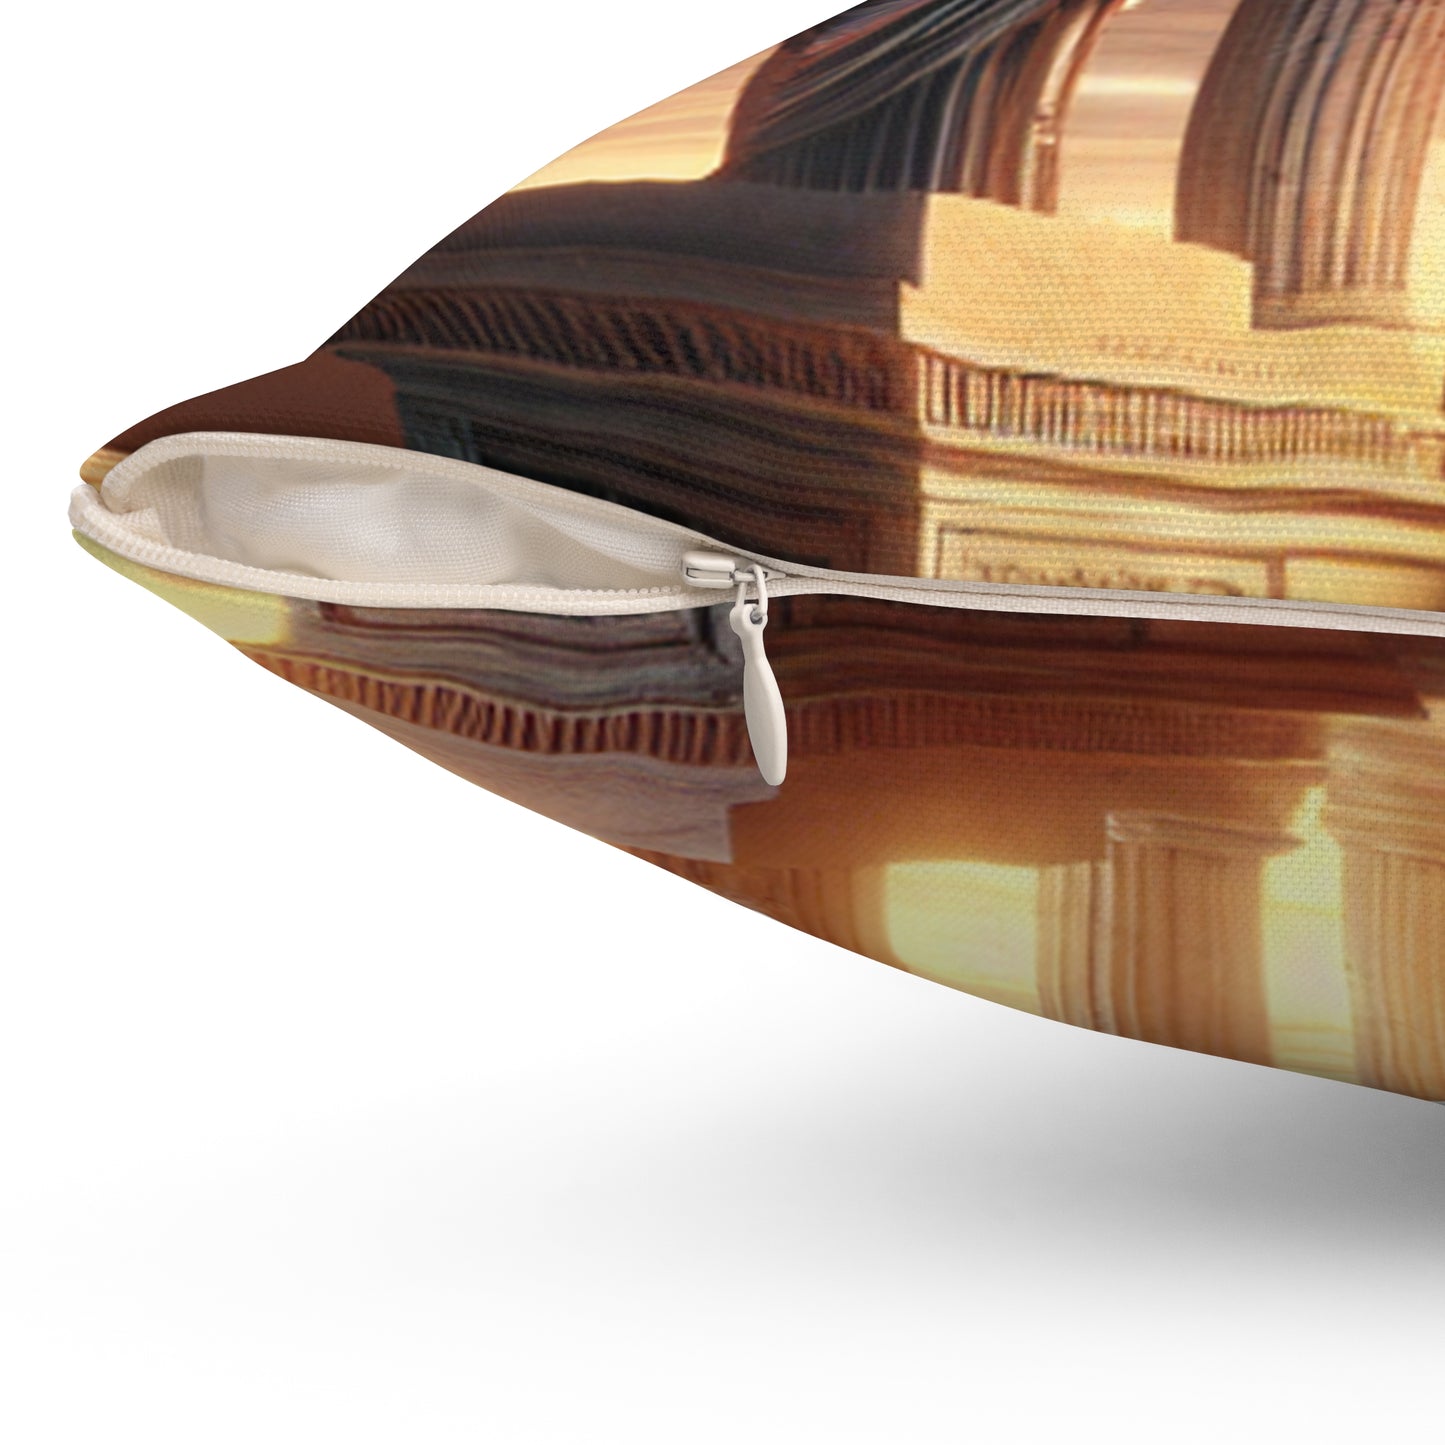 "Warm Glow of the Grecian Temple" - The Alien Spun Polyester Square Pillow Neoclassicism Style